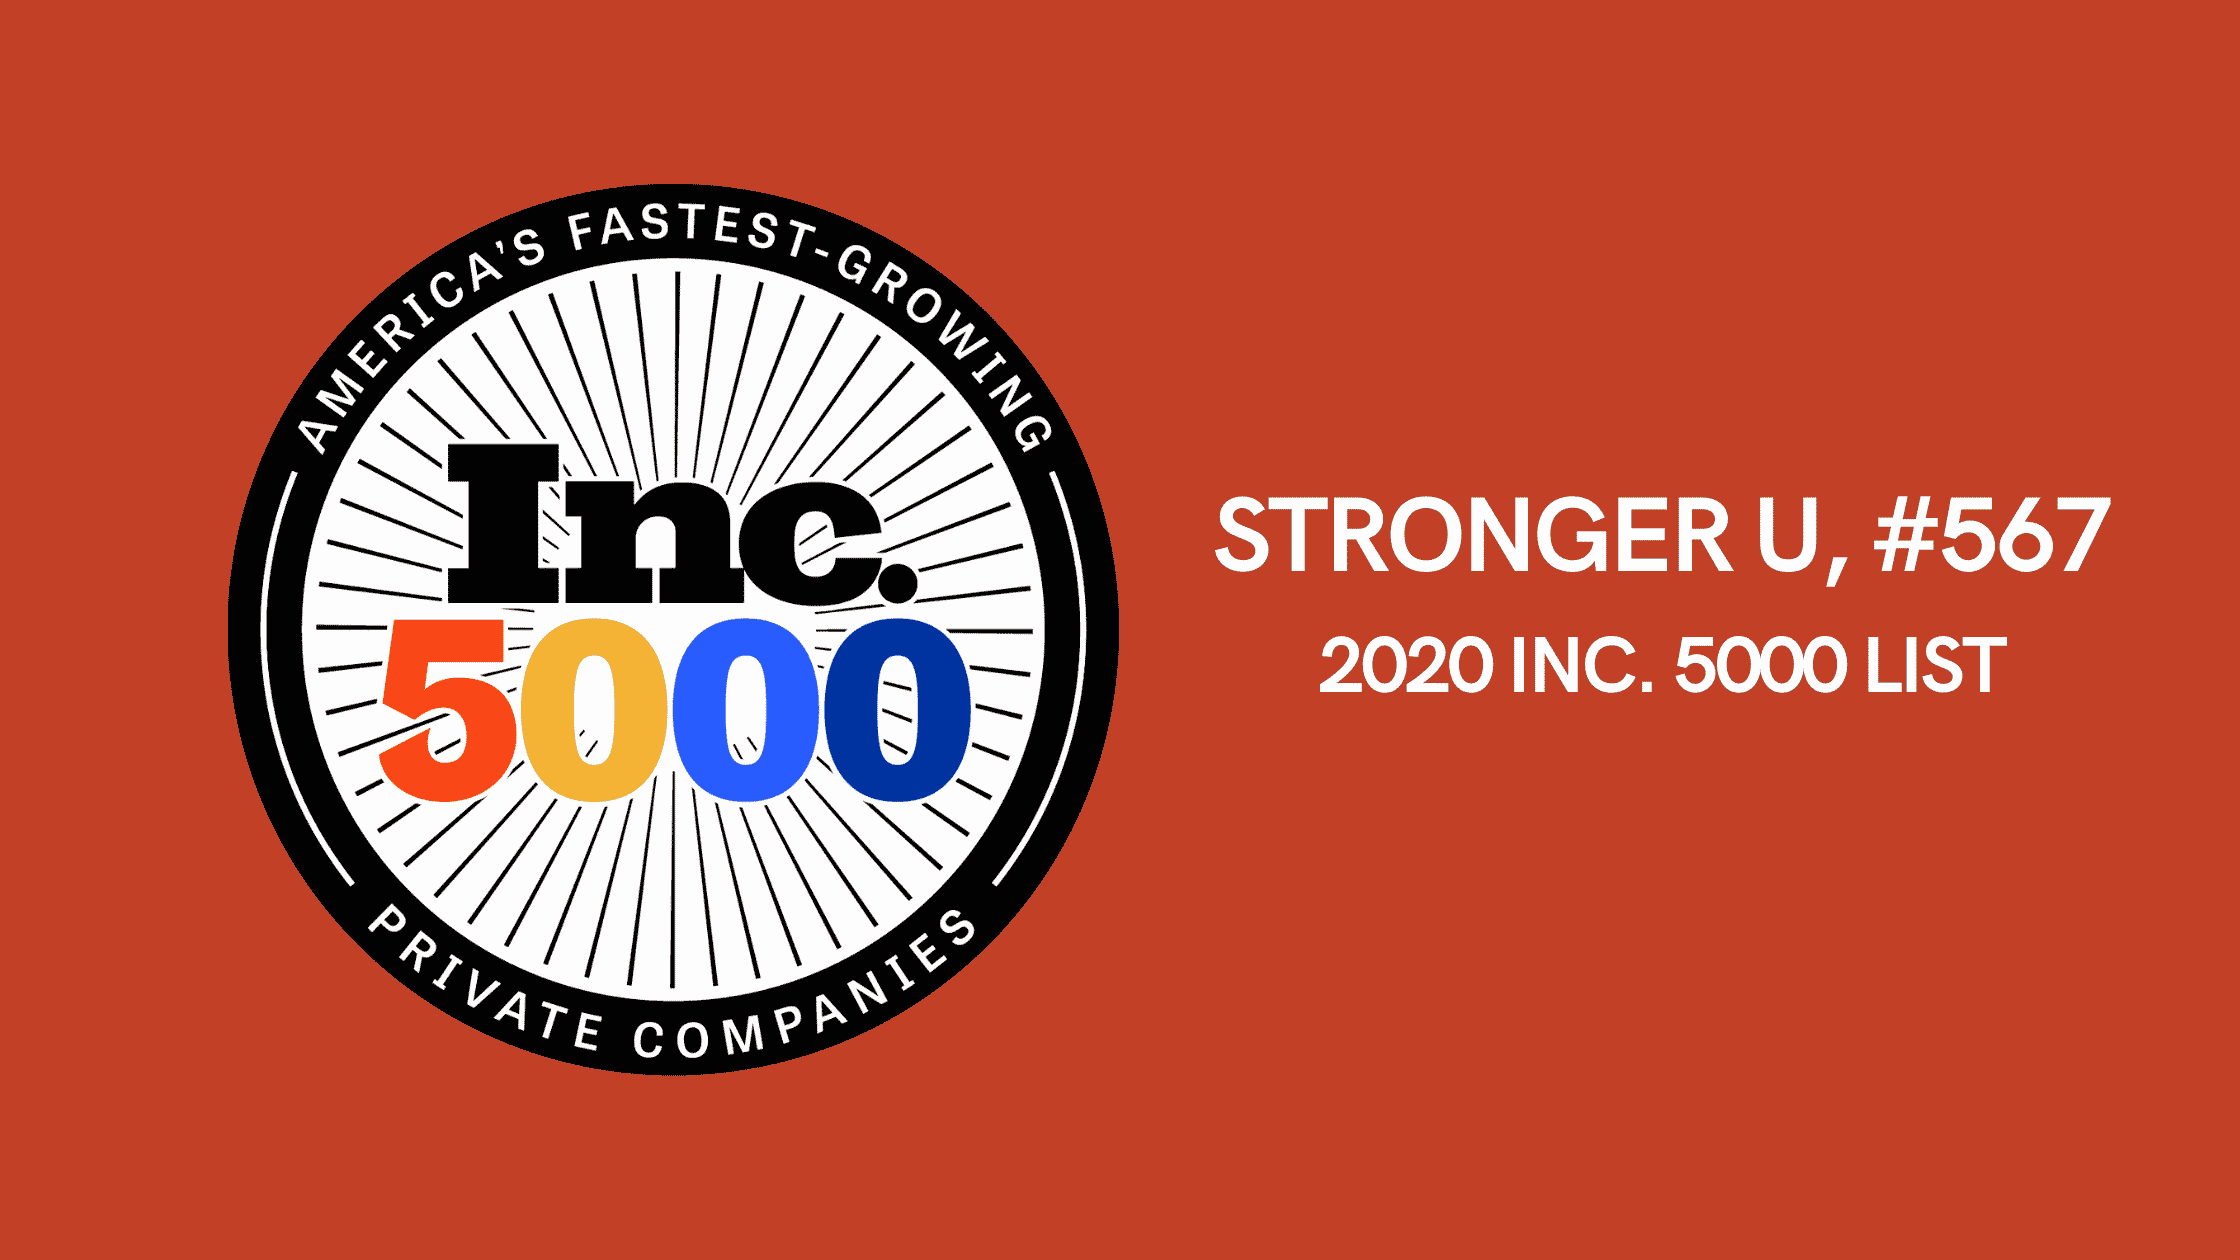 Stronger U graphic showing they are Inc 5000